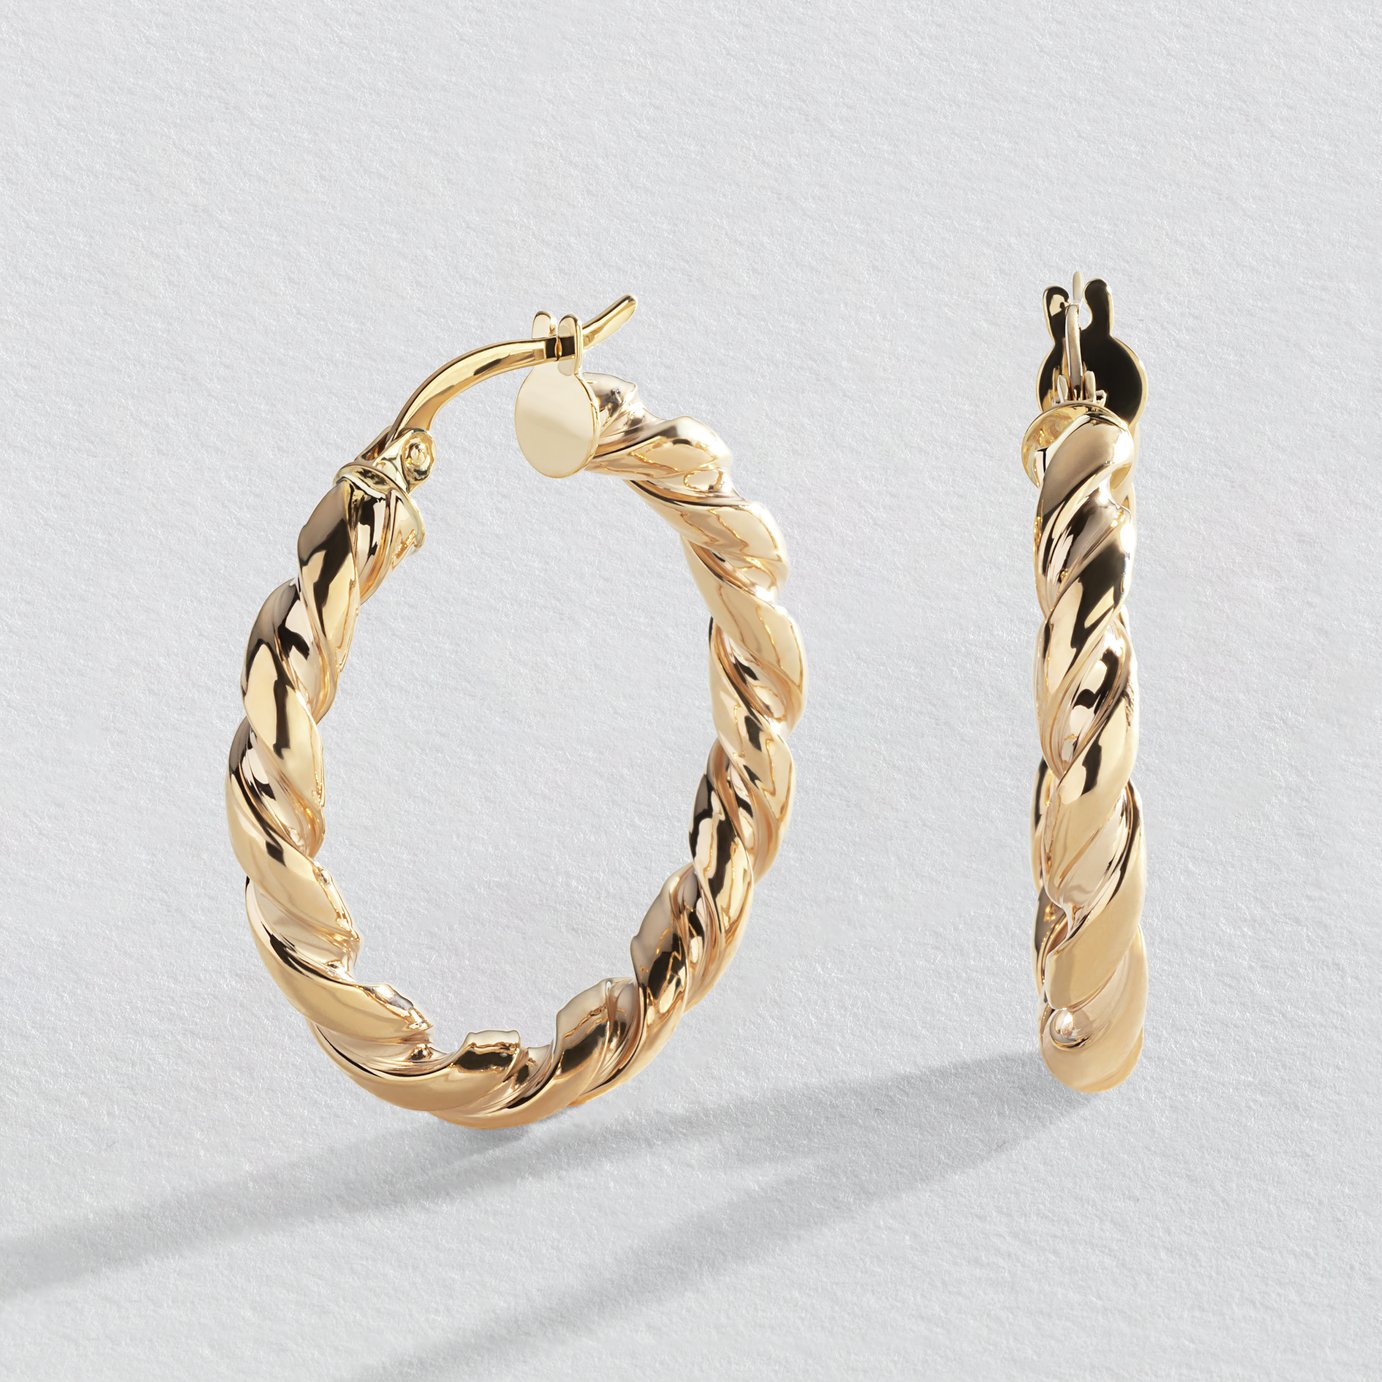 Revere 9ct Yellow Gold Twisted Hoop Earrings